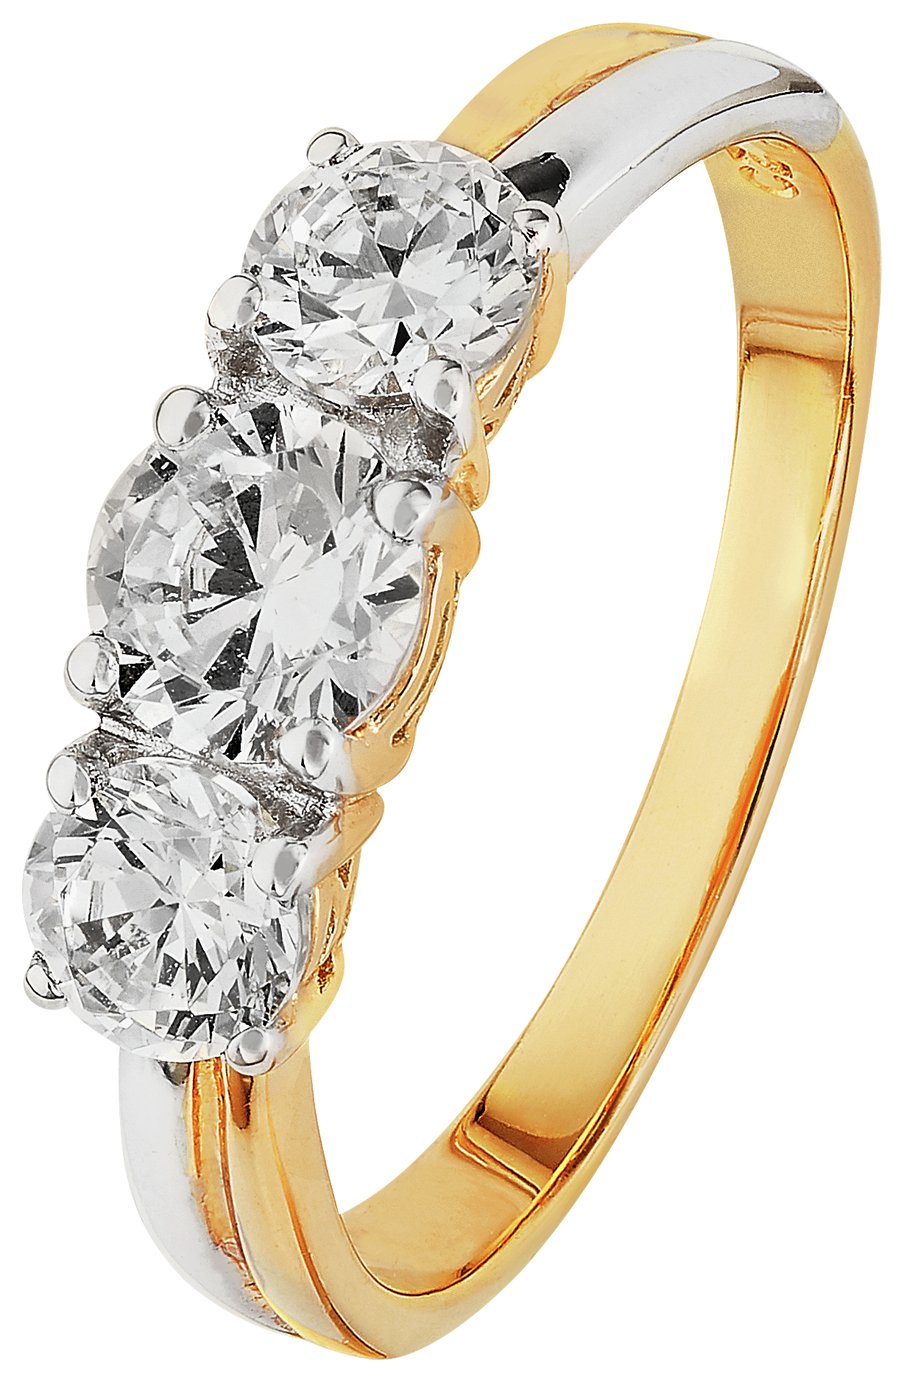 Revere 9ct Yellow Gold Cubic Zirconia Trilogy Ring